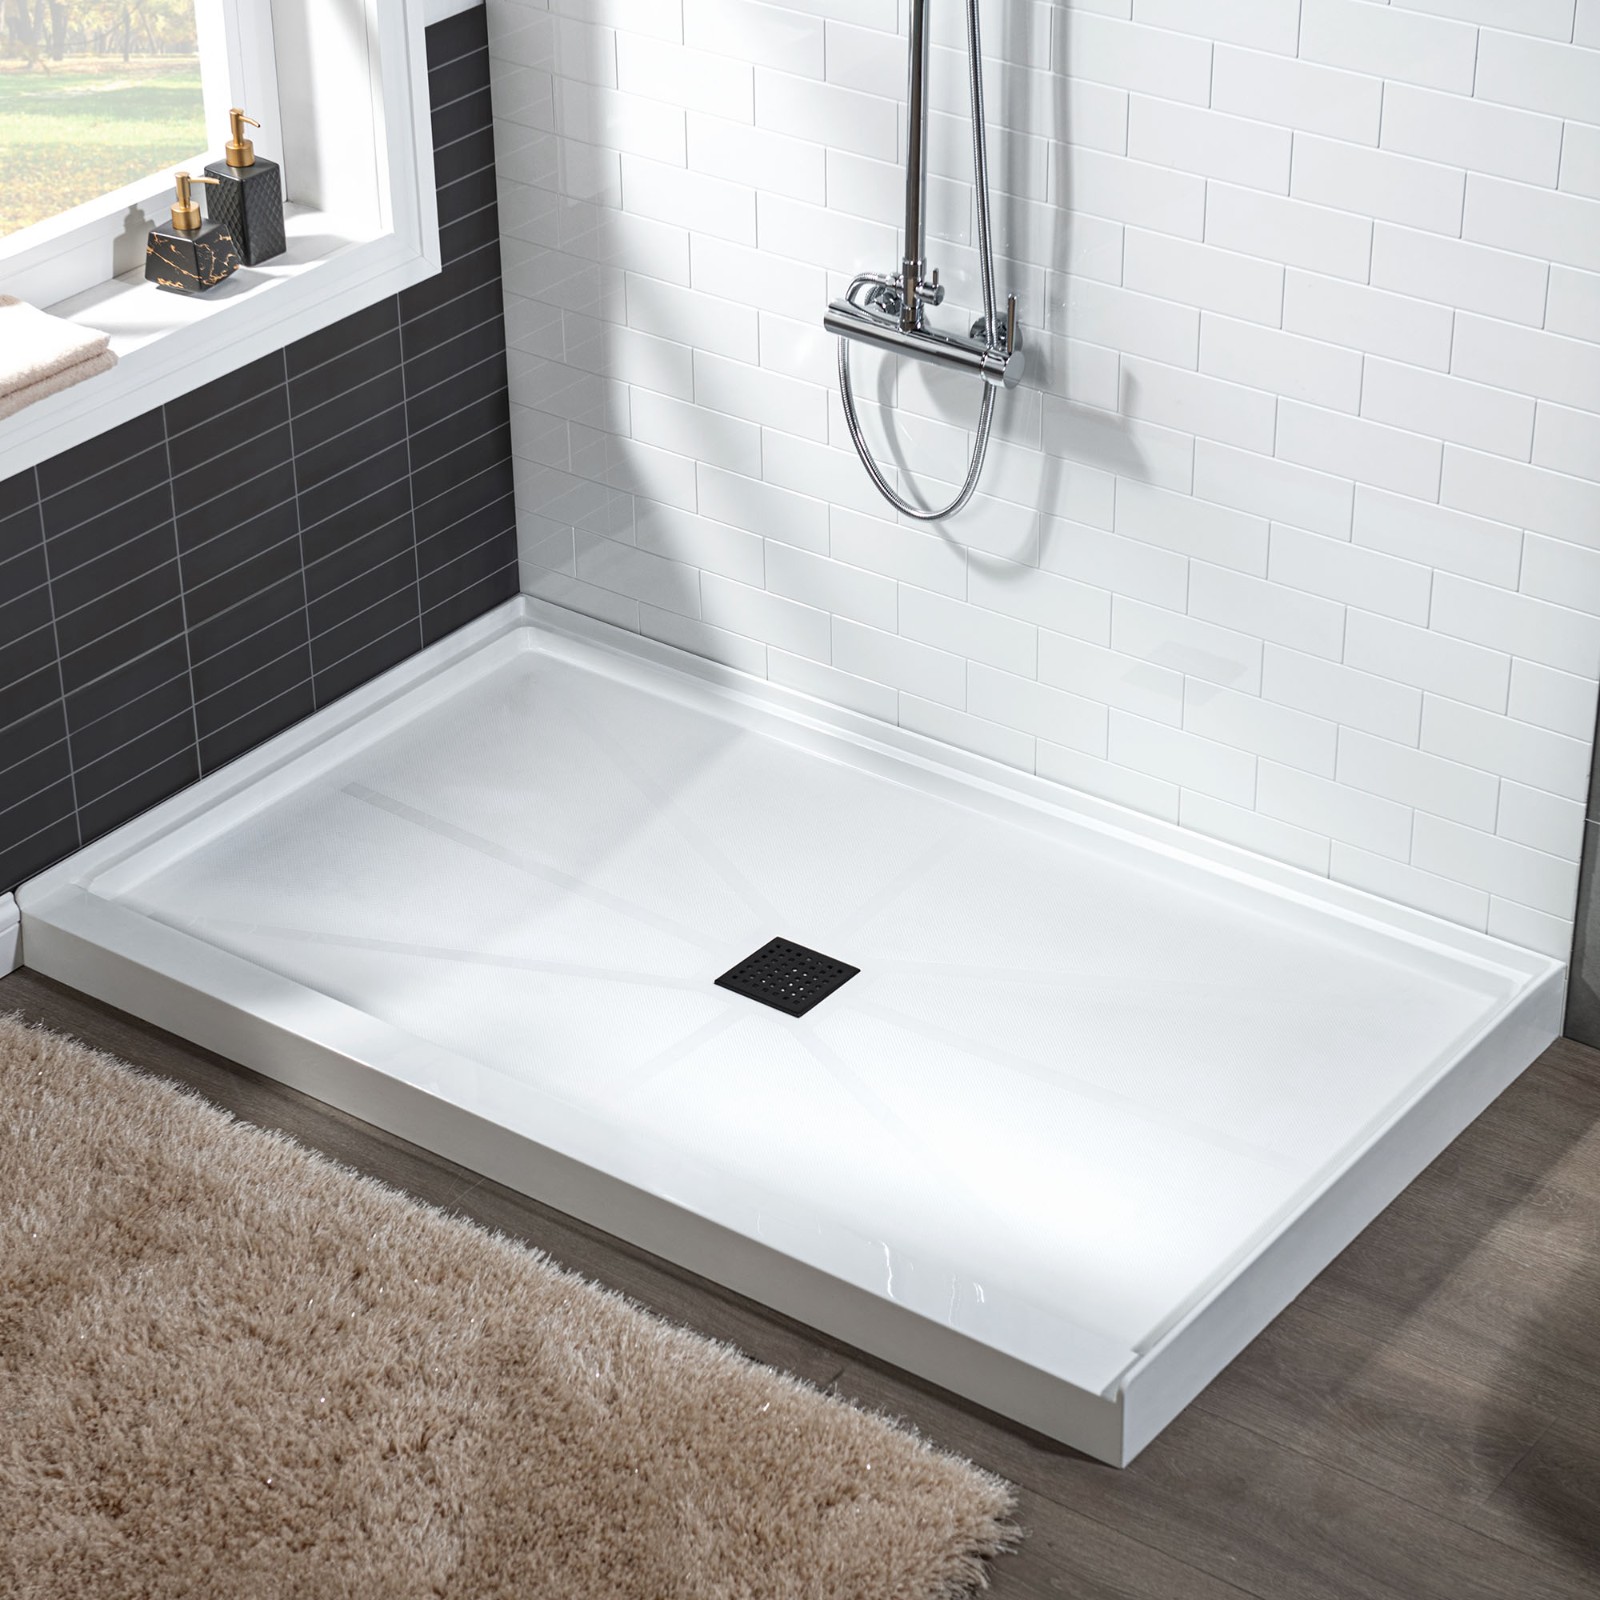  WOODBRIDGE SBR6030-1000C-MB SolidSurface Shower Base with Recessed Trench Side Including Matte Black Linear Cover, 60